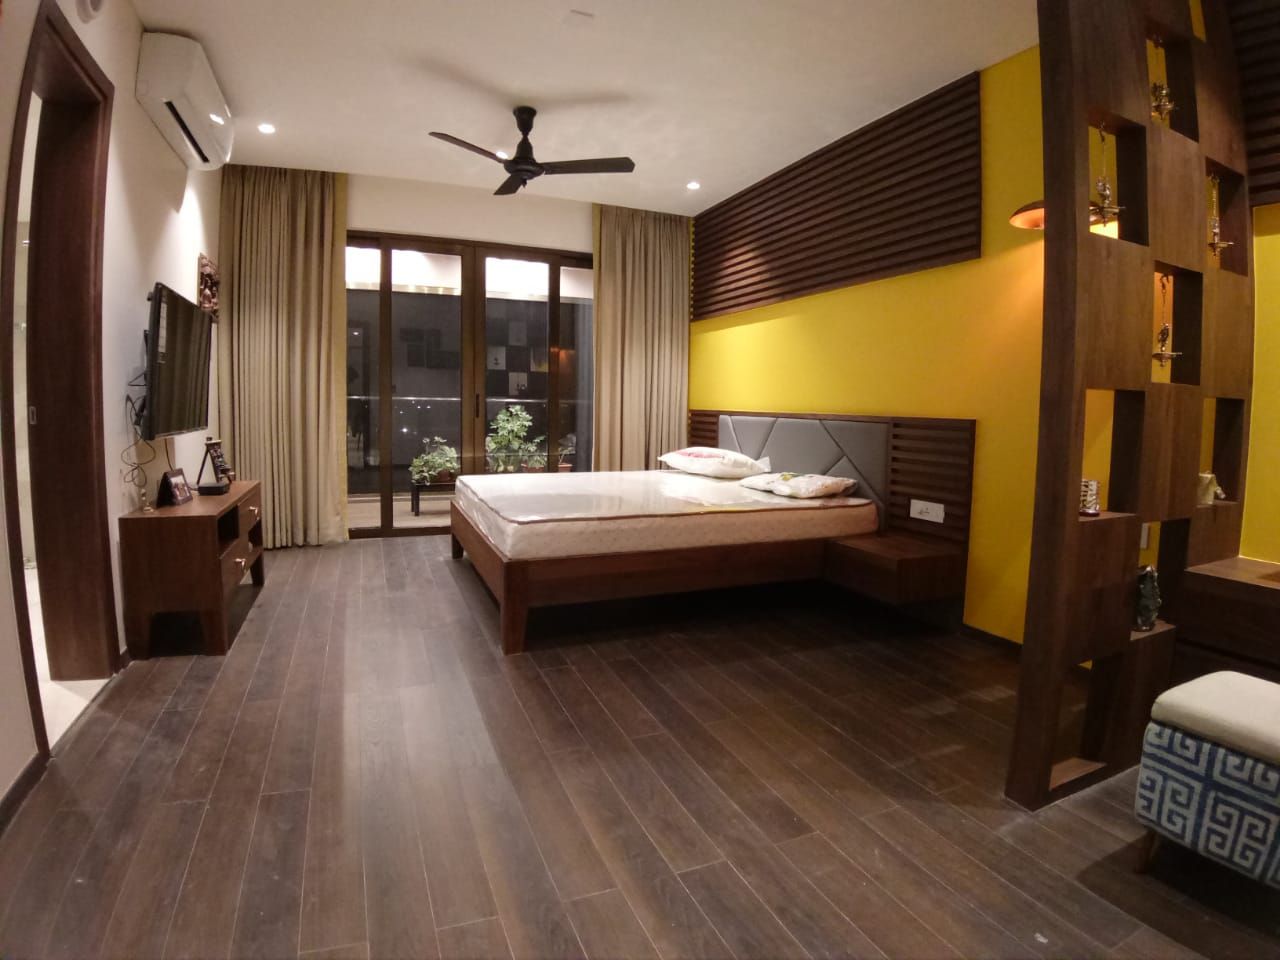 Interior work of 4.5 BHK apartment in kharadi, pune, Exemplary Services Exemplary Services 모던스타일 침실